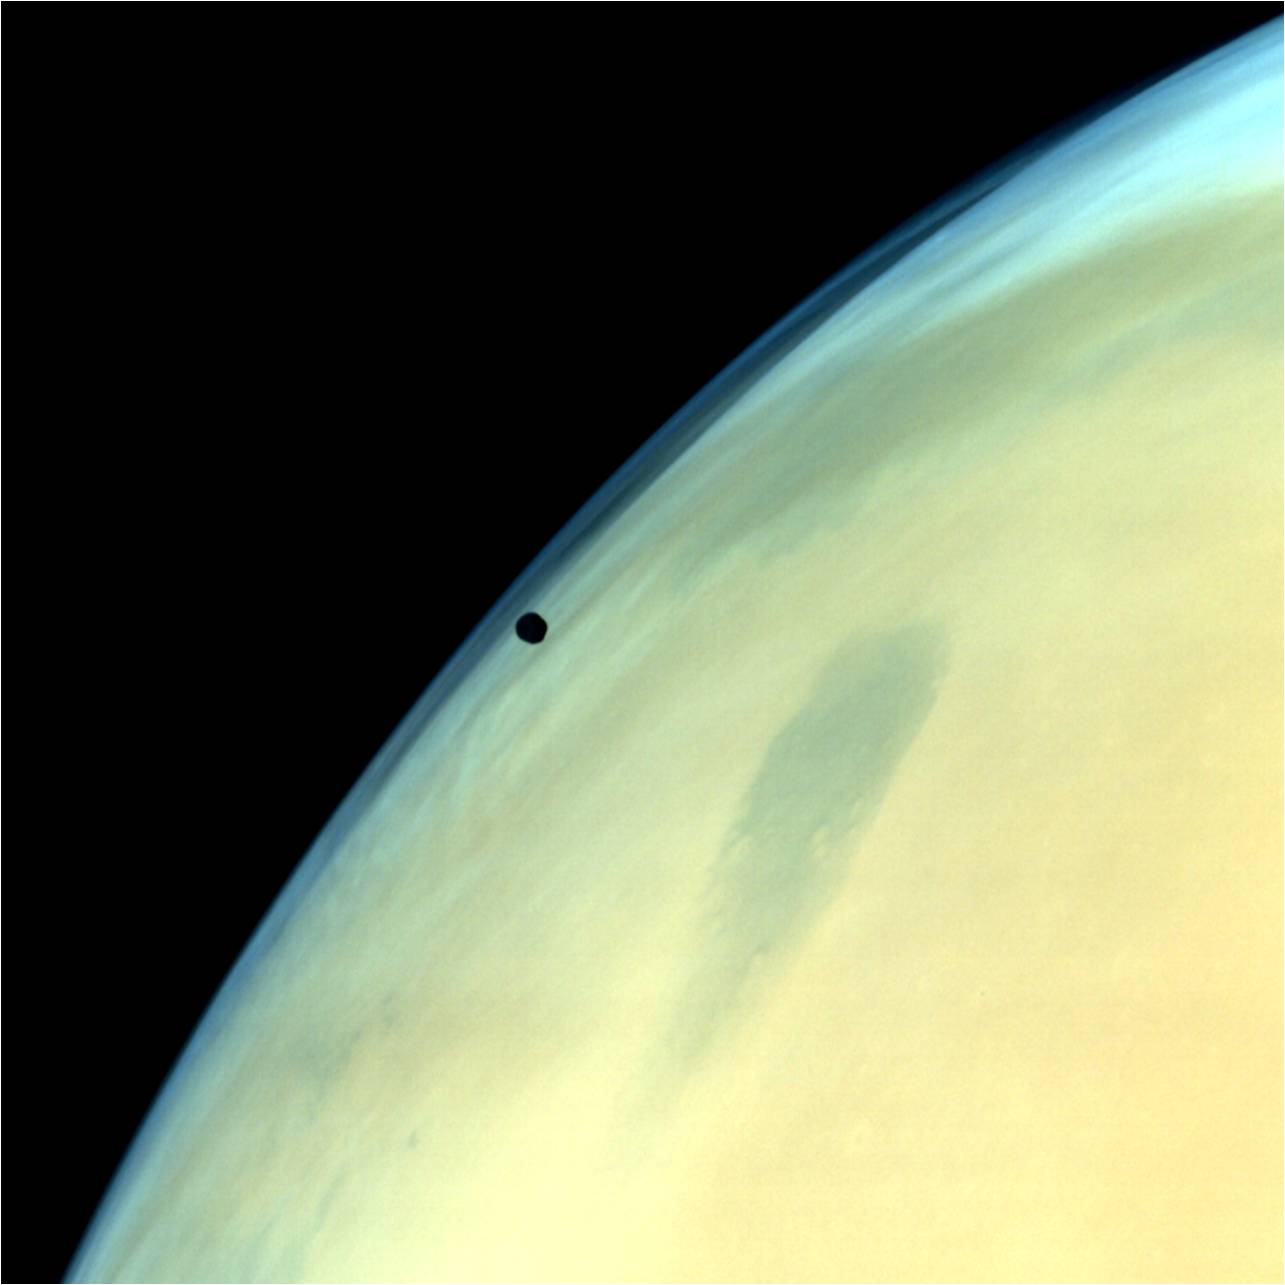 Phobos, one of the two natural satellites of Mars silhouetted against the Martian surface